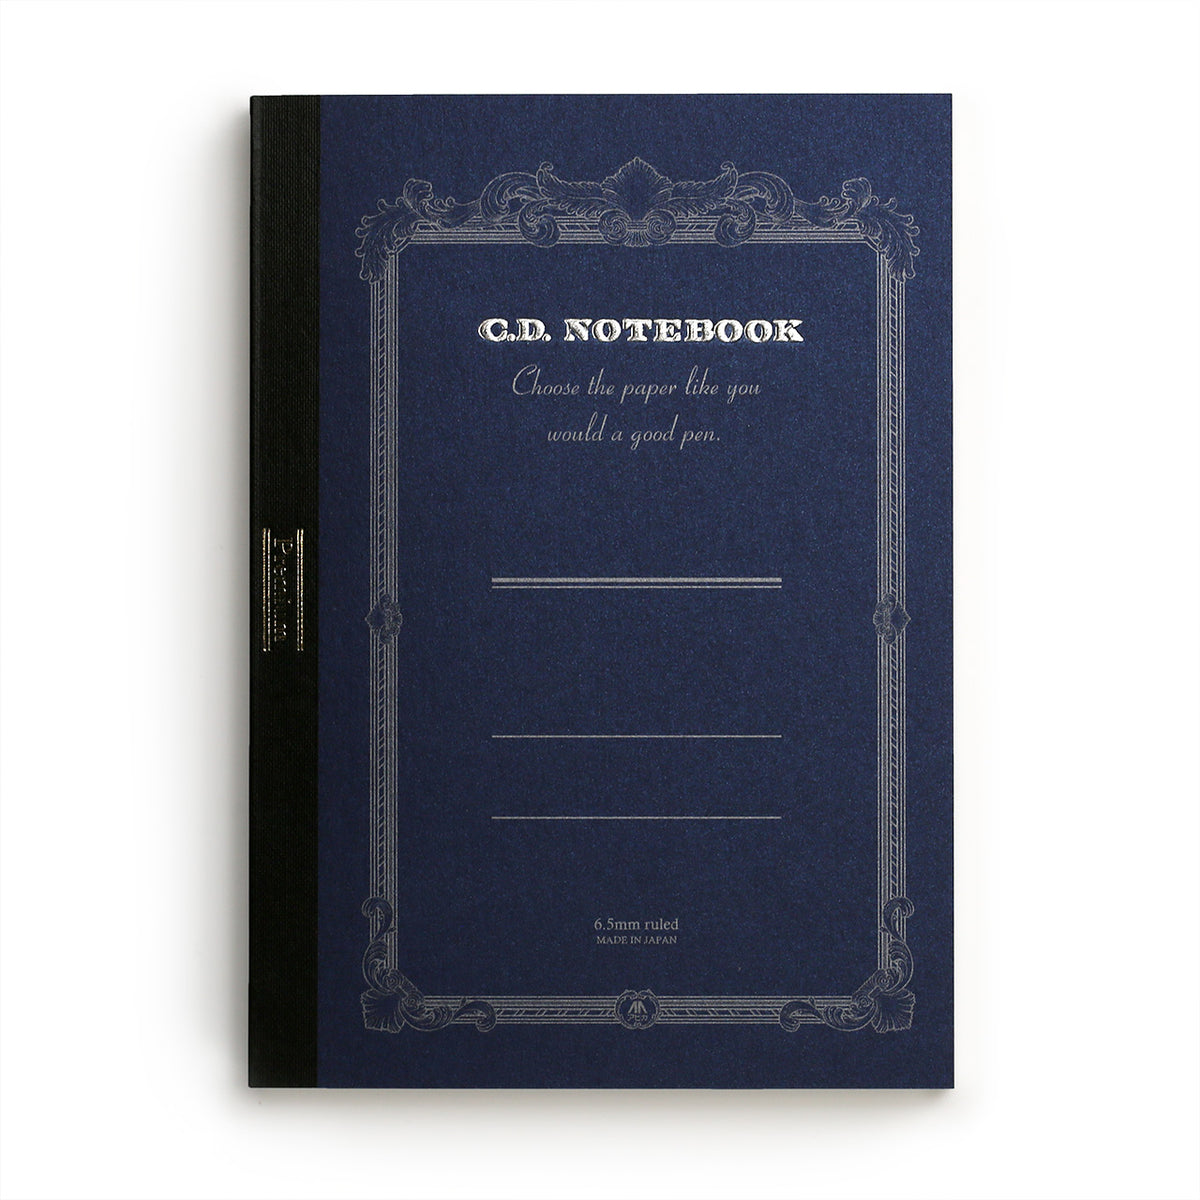 A6 CD Premium notebook with 6.5mm ruled pages and dark blue shimmer cover